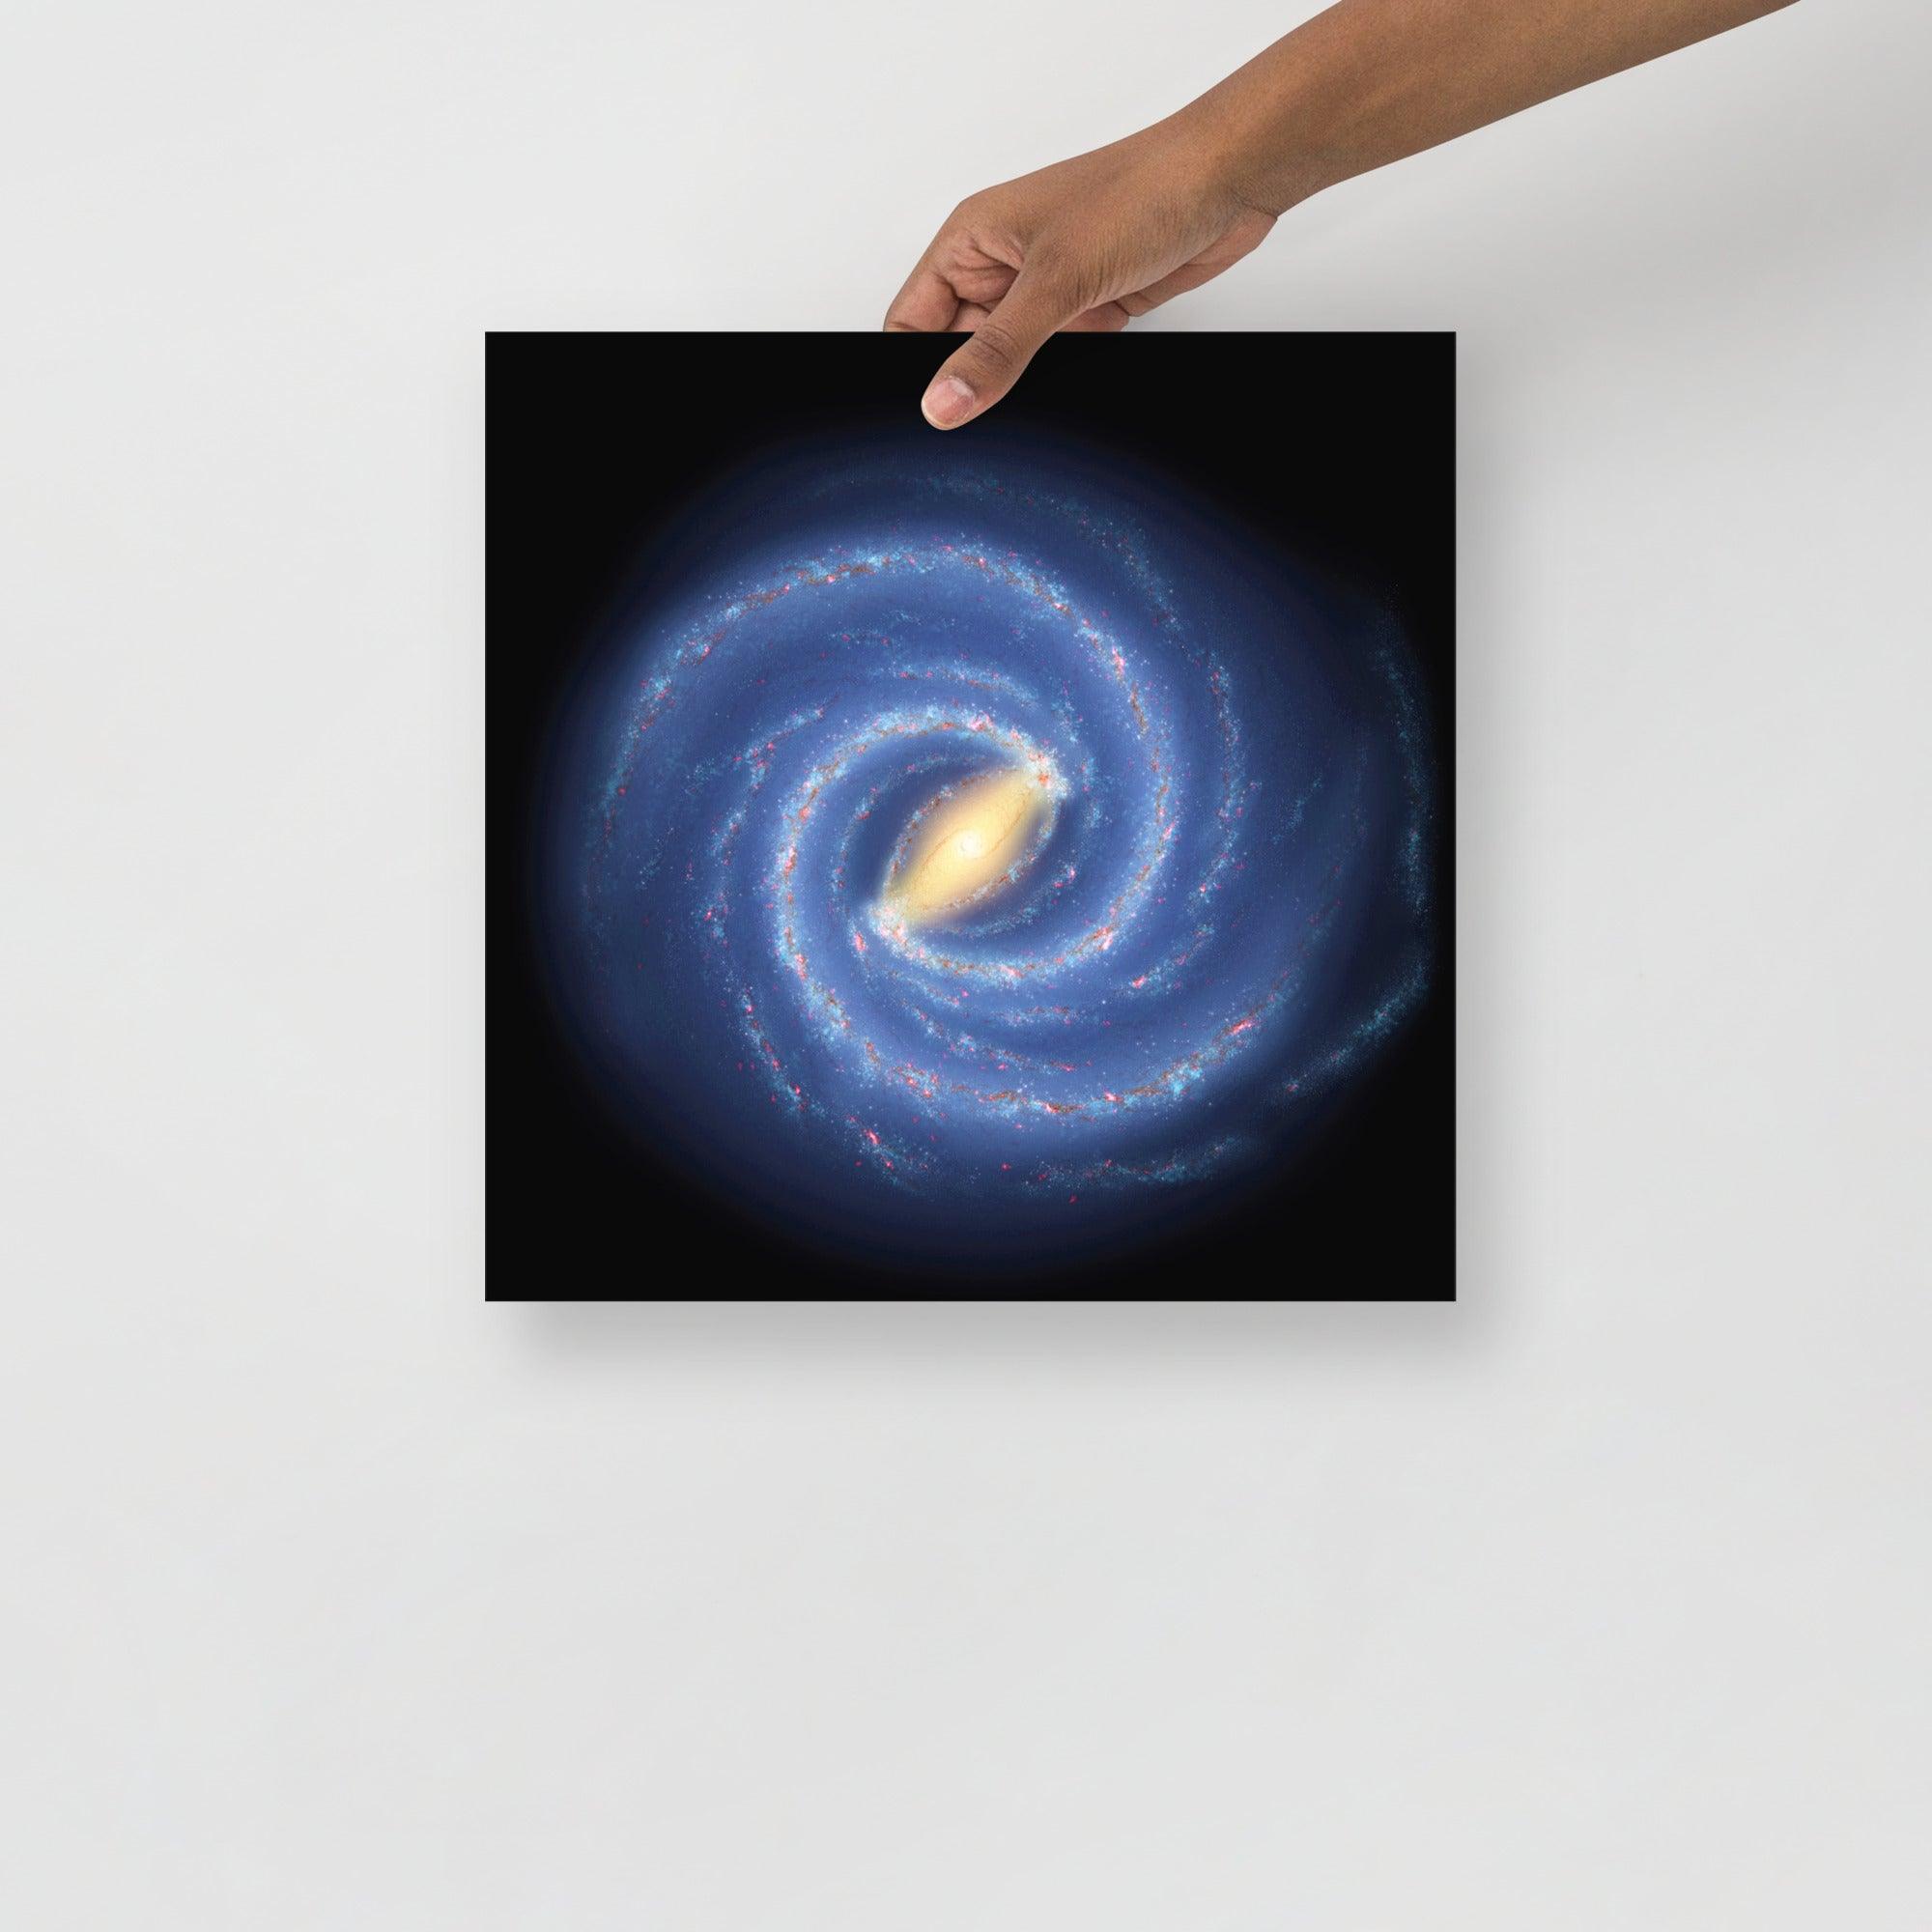 The Milky Way Galaxy poster on a plain backdrop in size 14x14”.